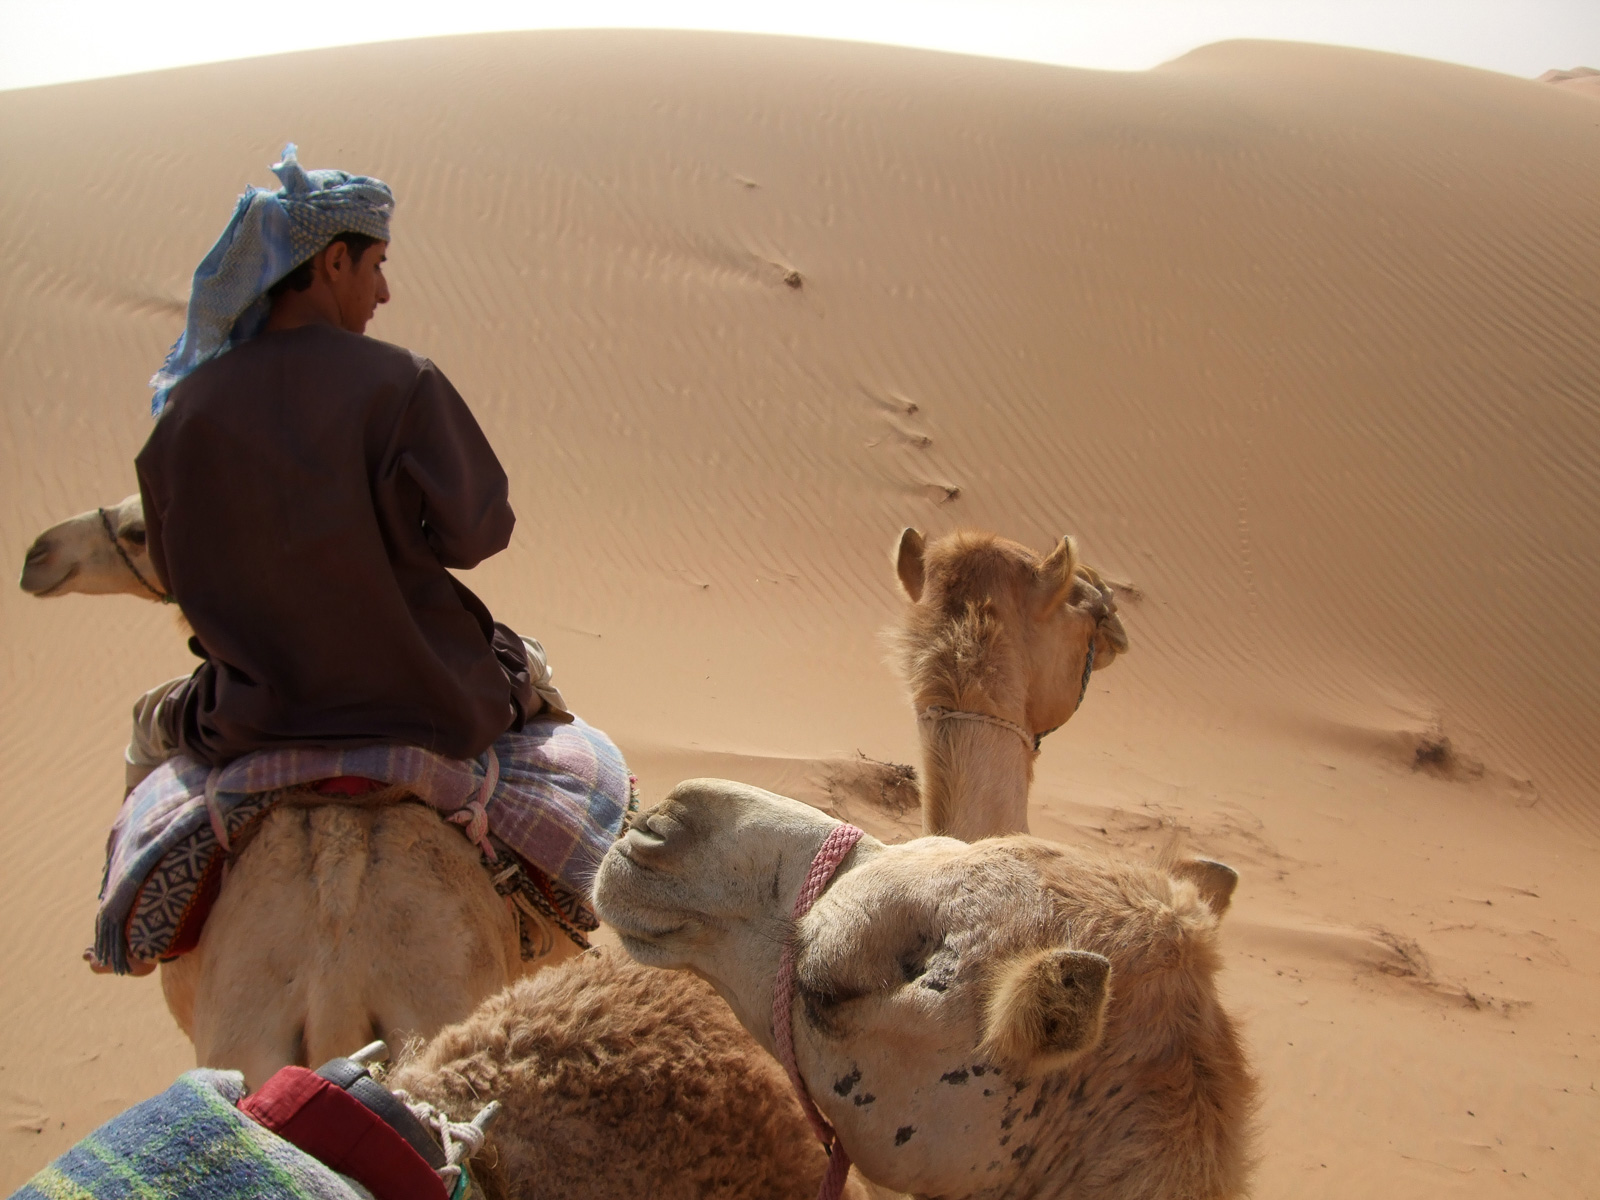 Oman Deserts and Camels